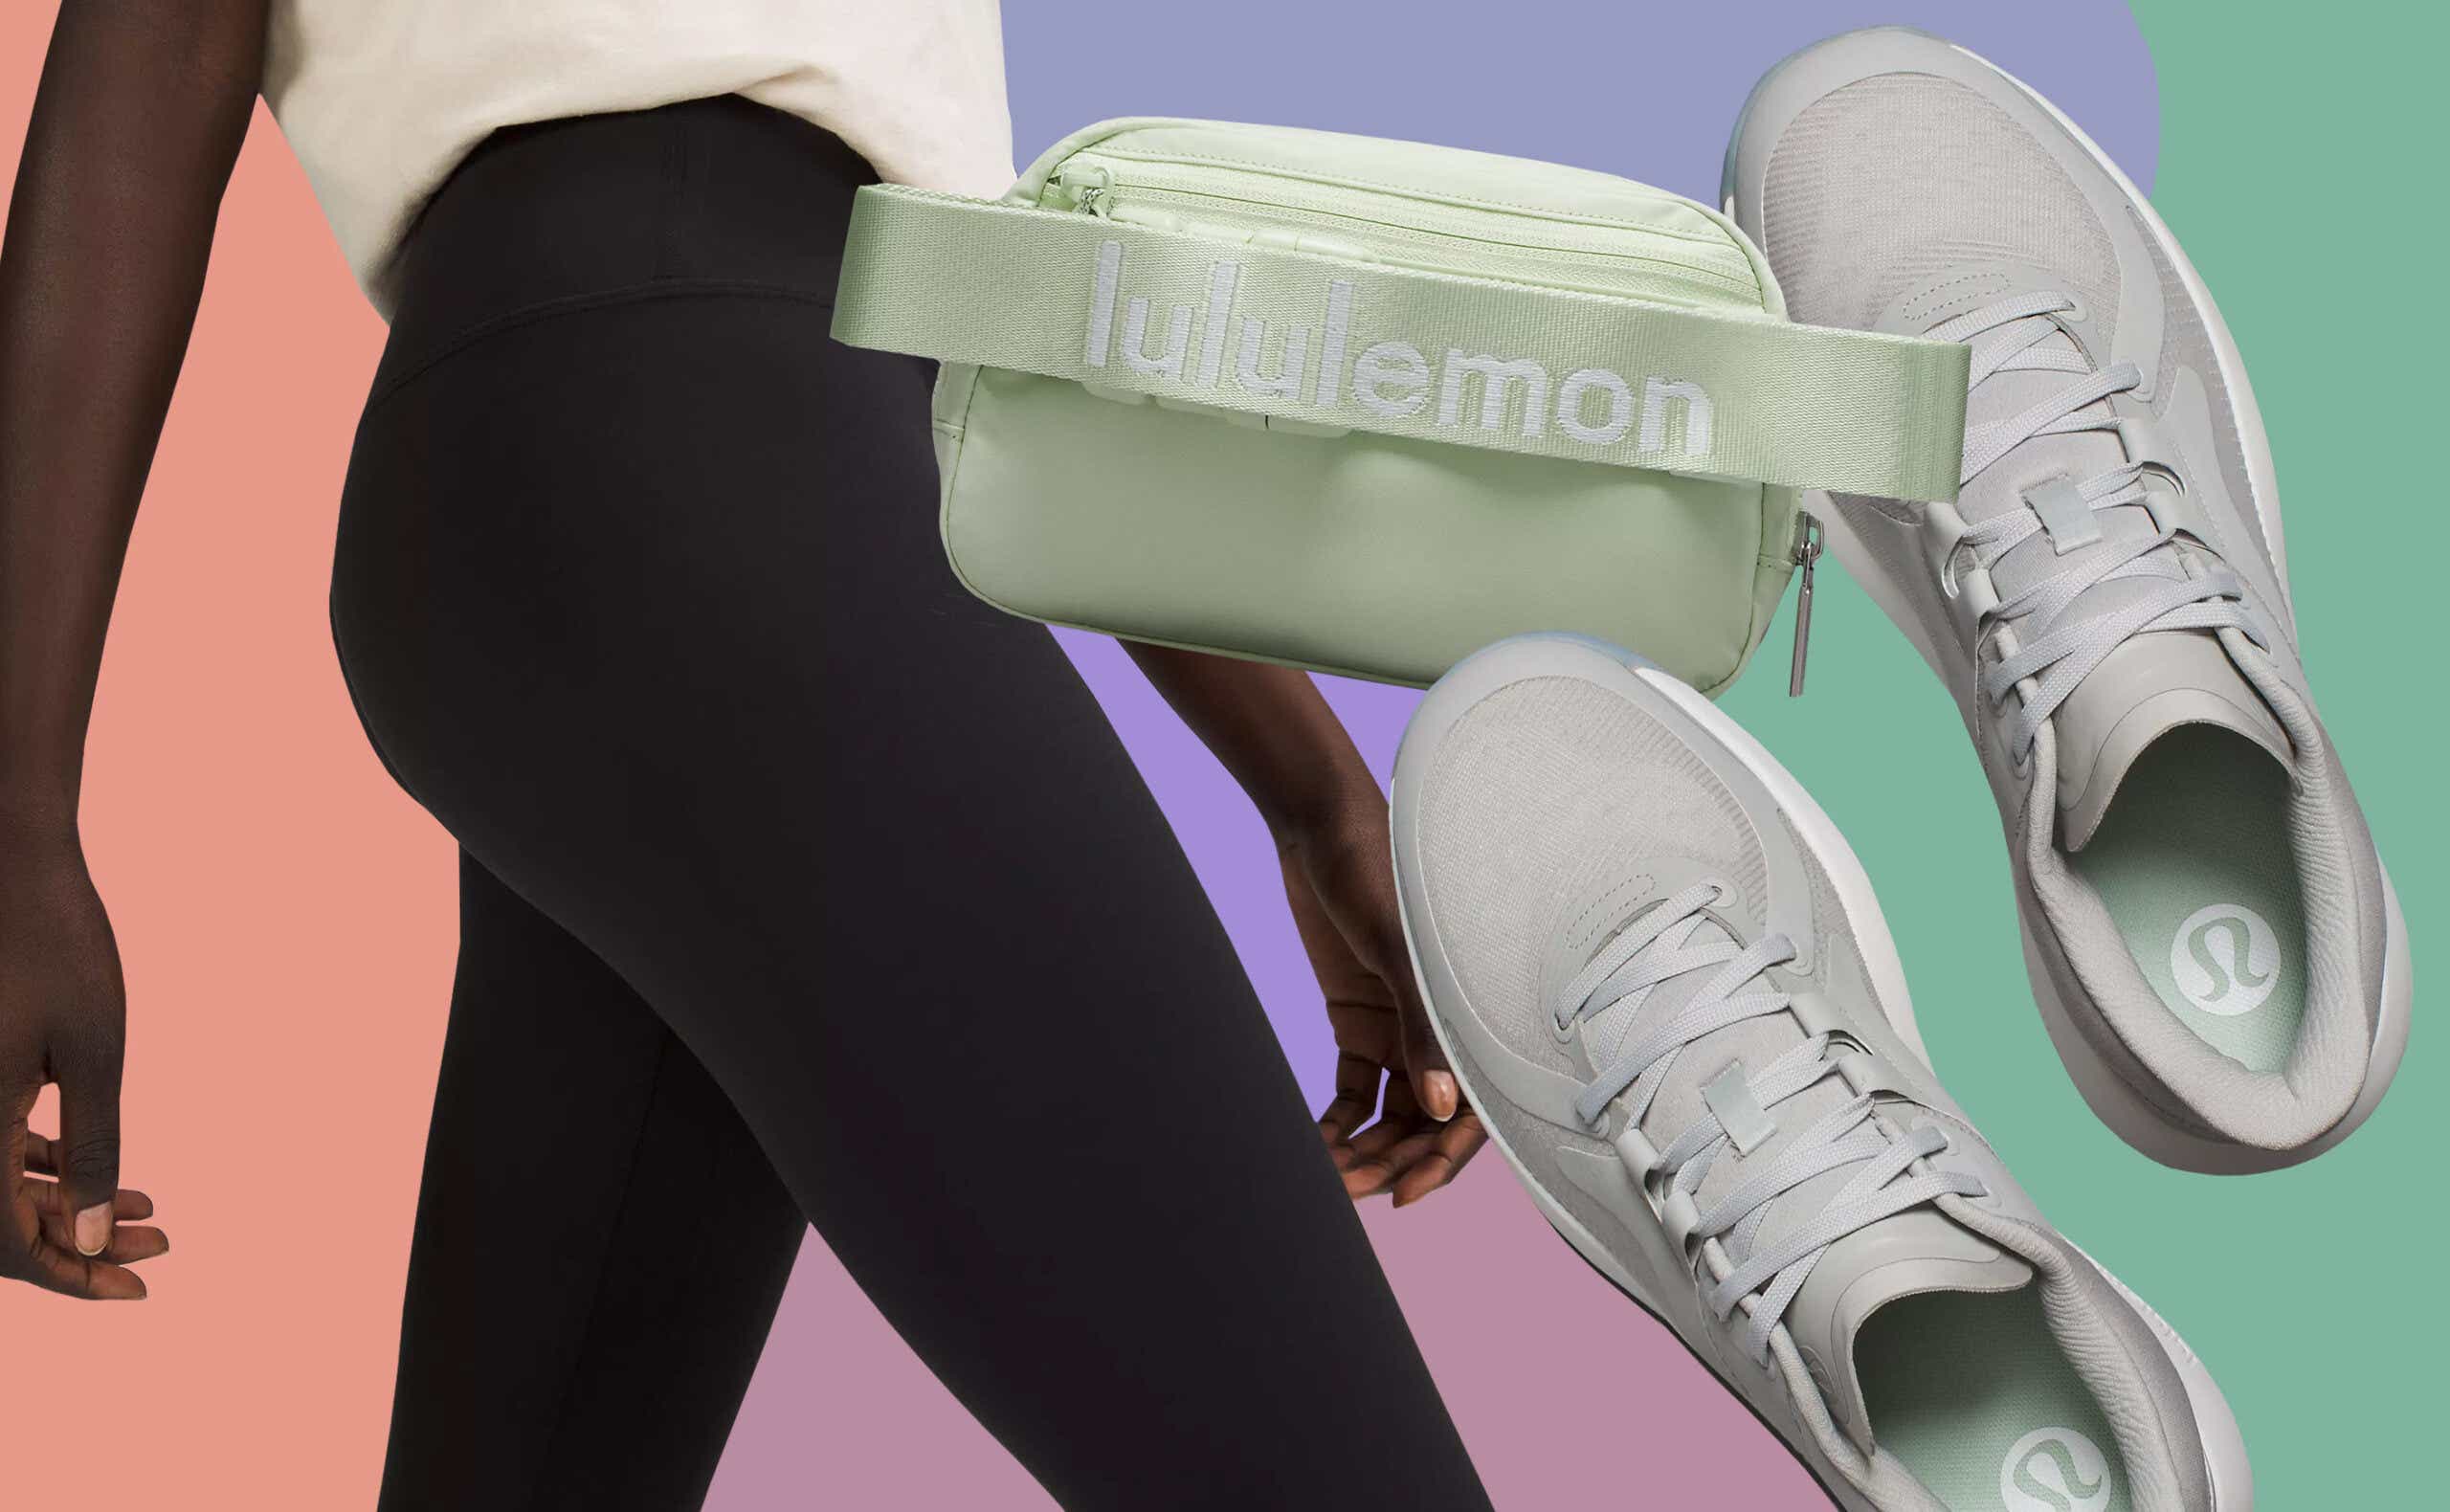 19 Best Mother's Day Gifts at Lululemon - Athleisure Gifts for